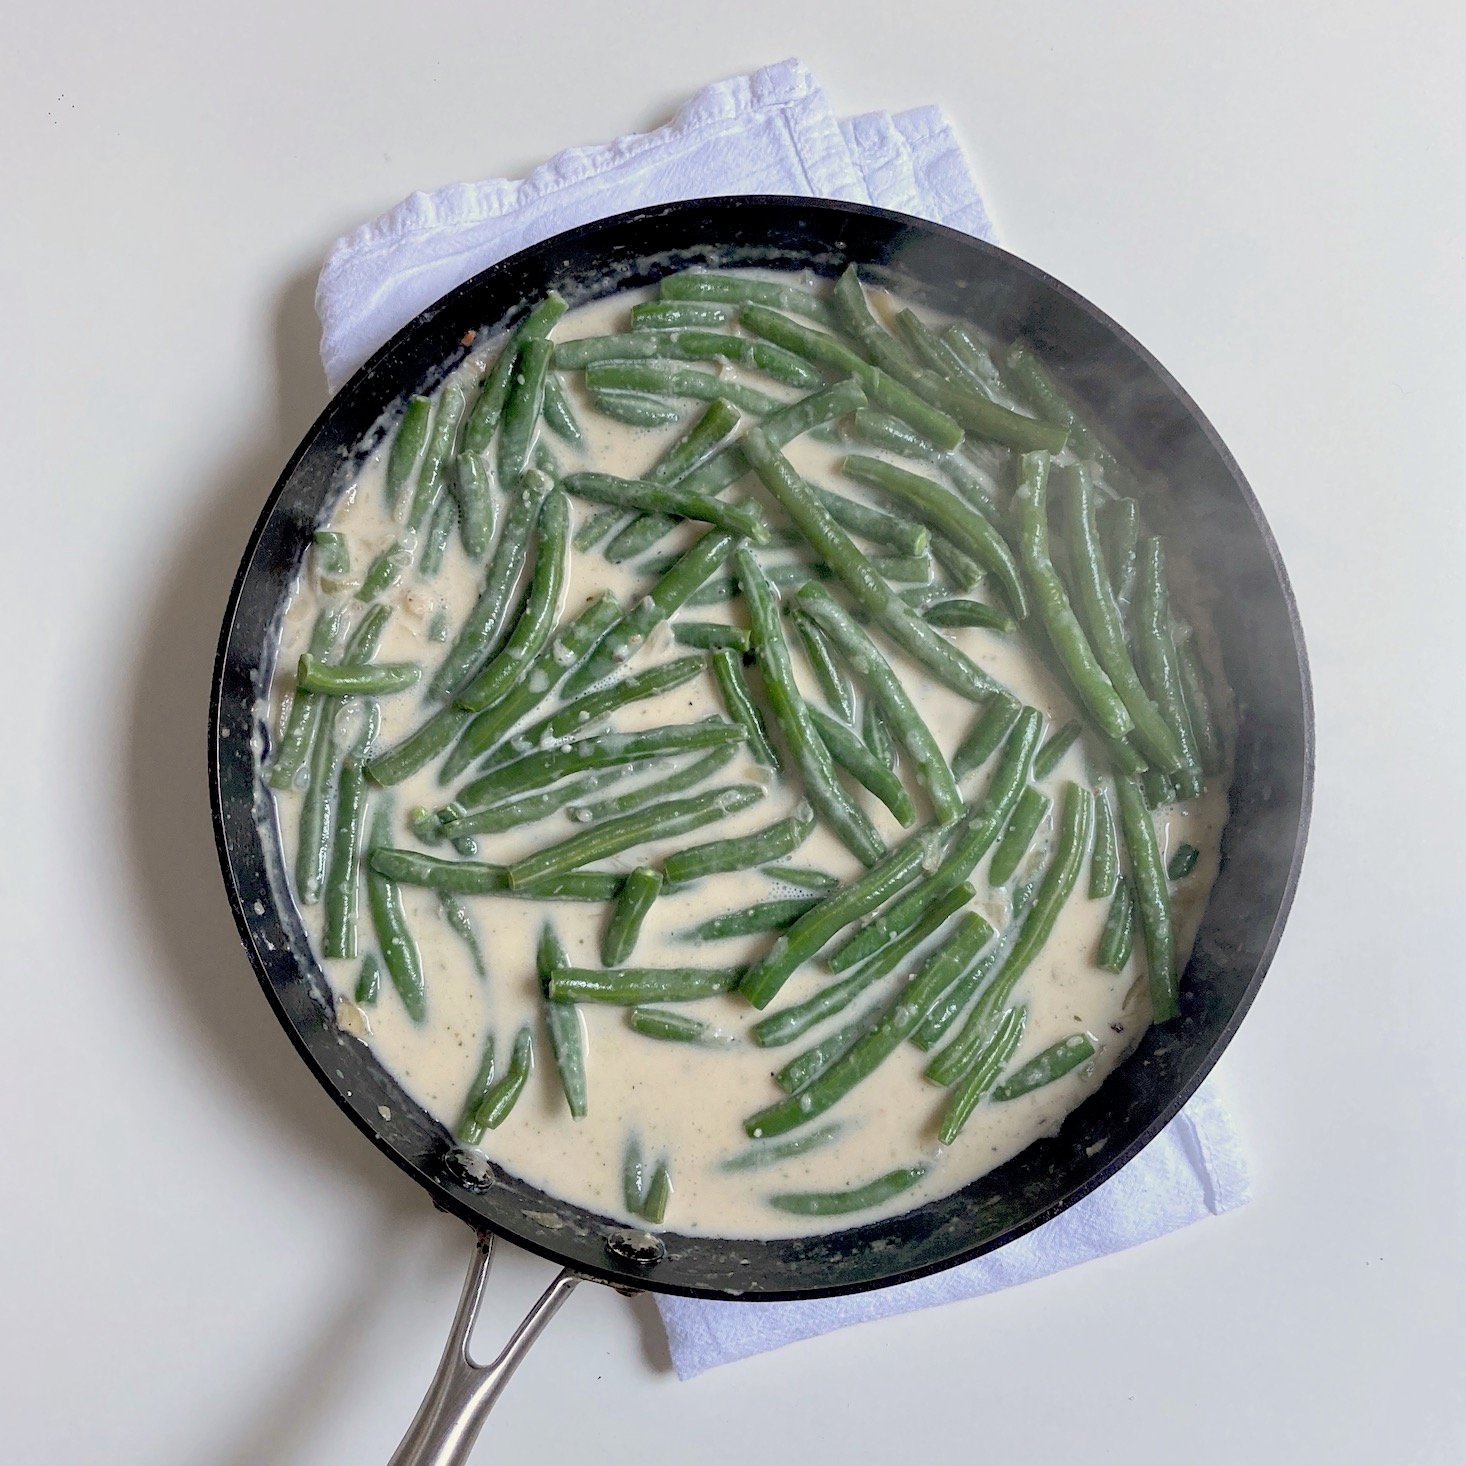 Beans with cream sauce added.